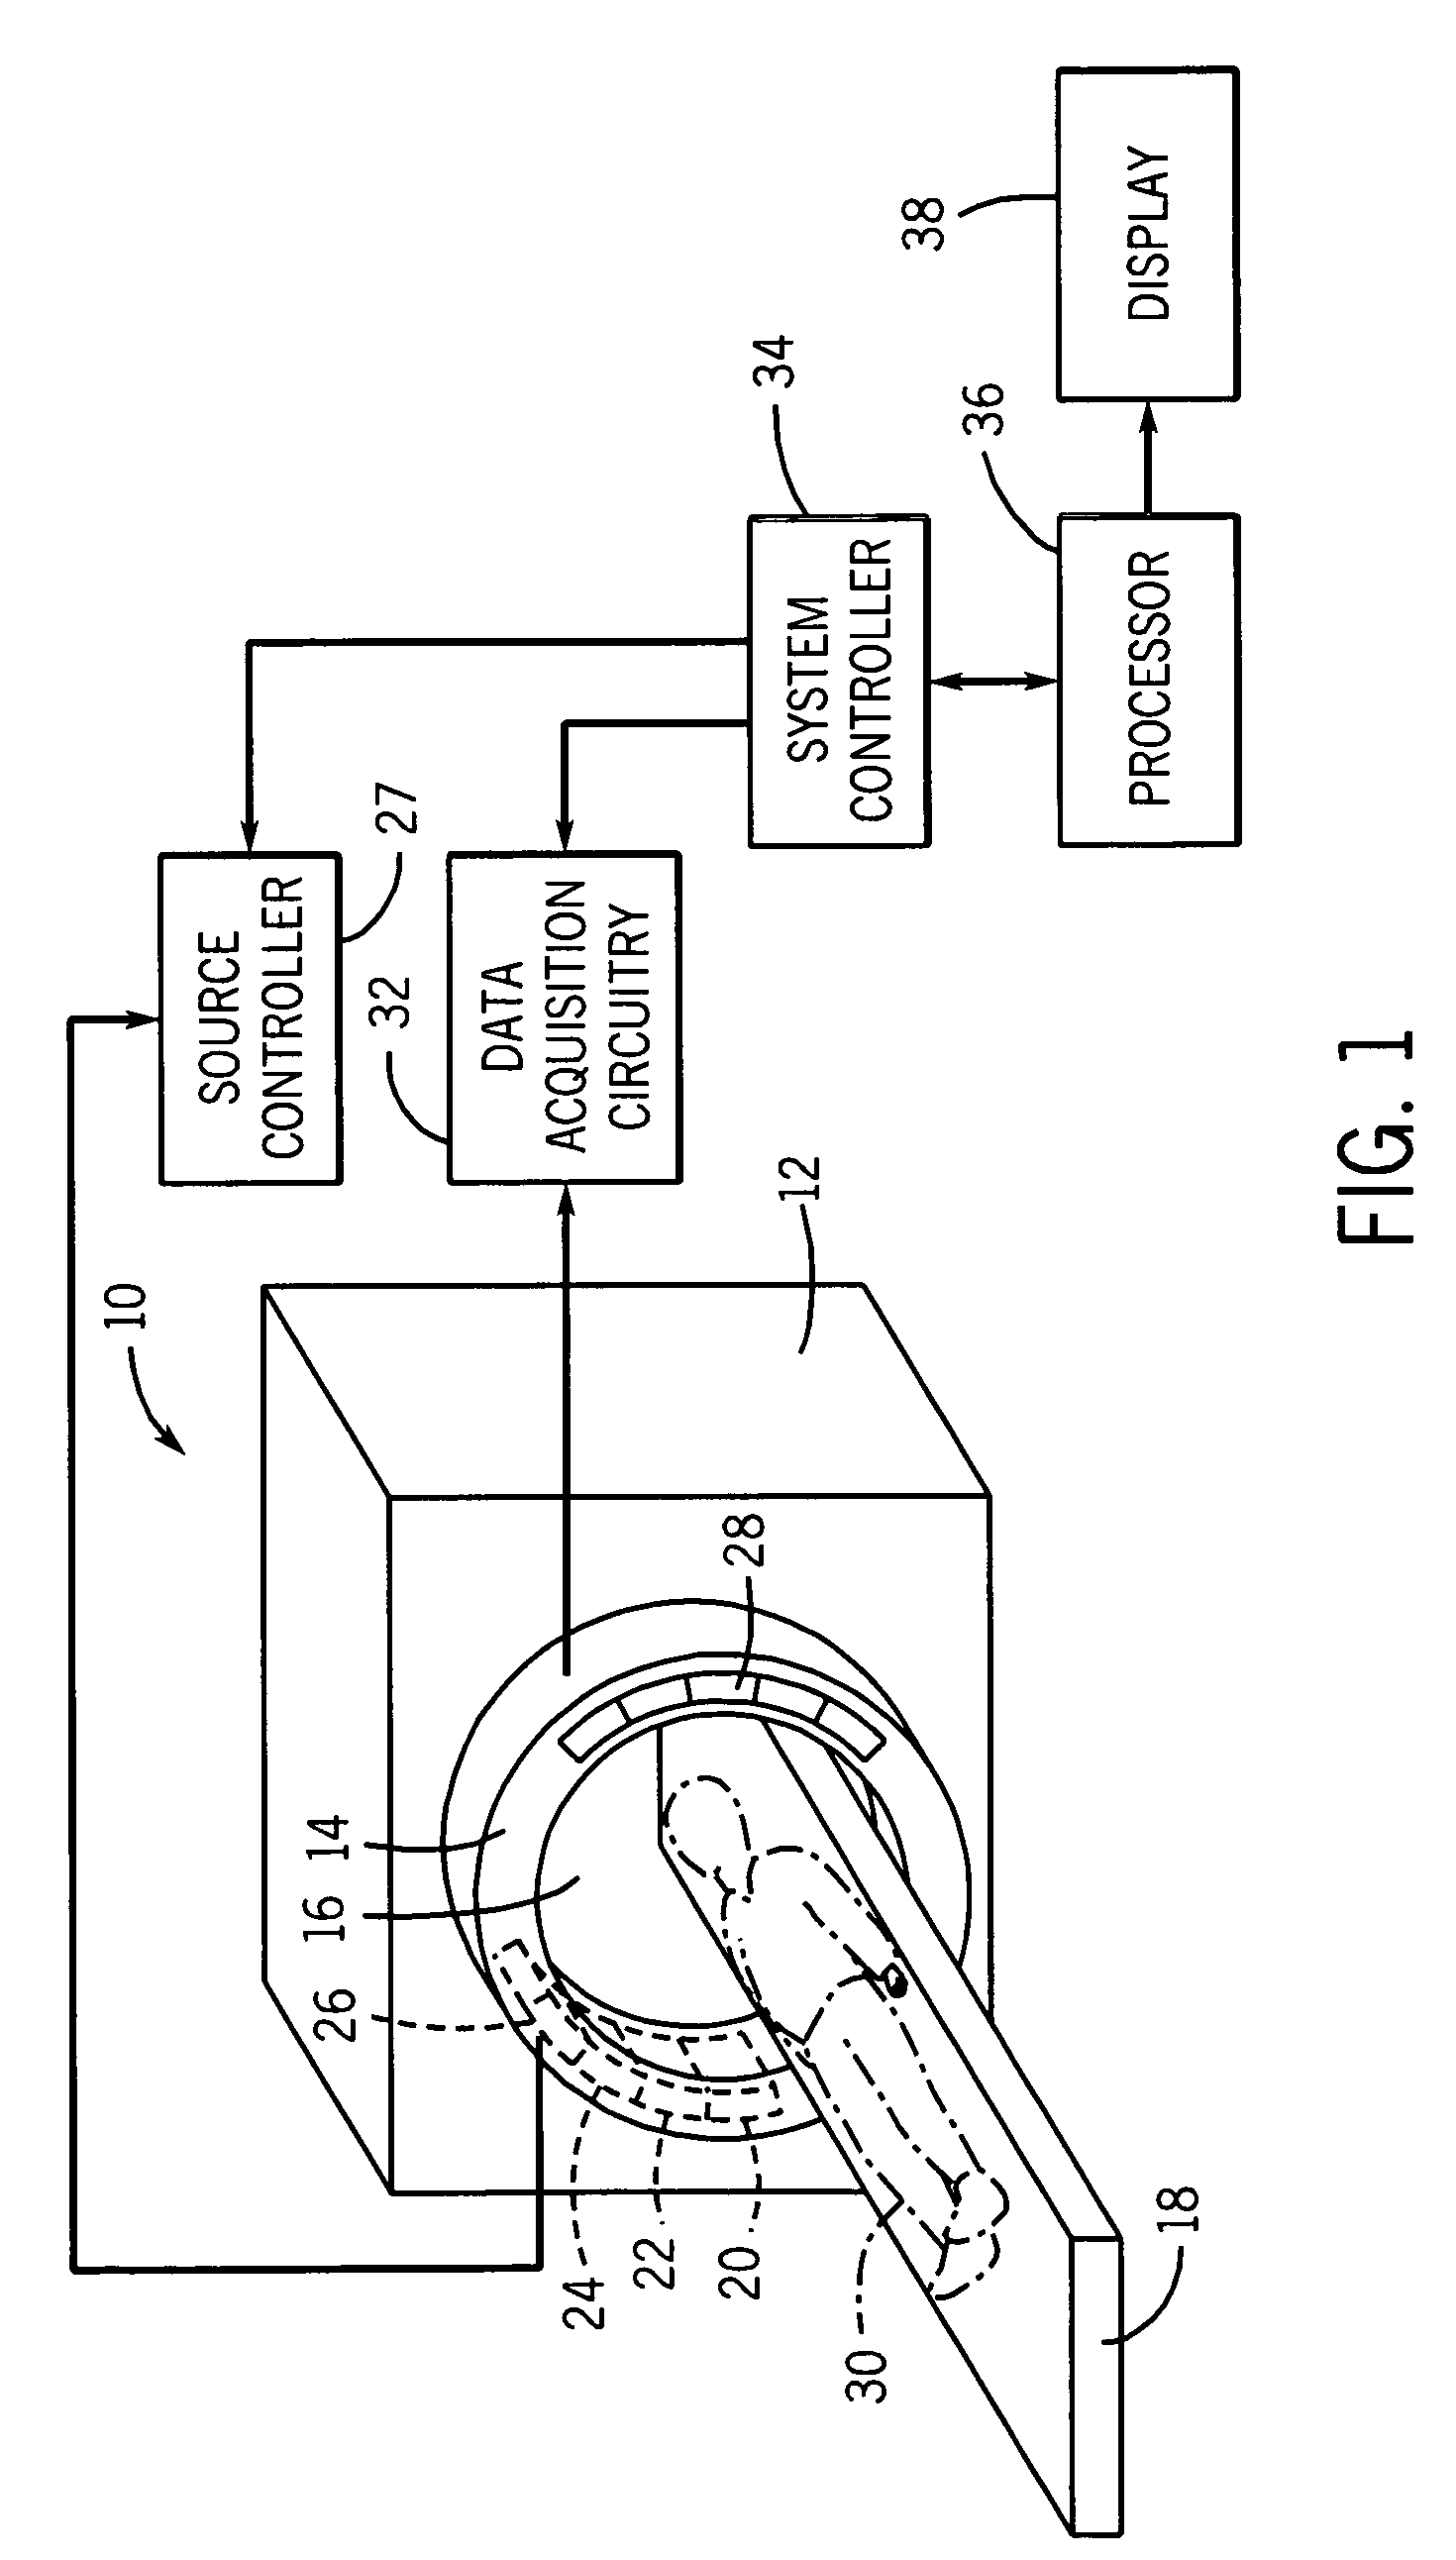 System and method for X-ray spot control